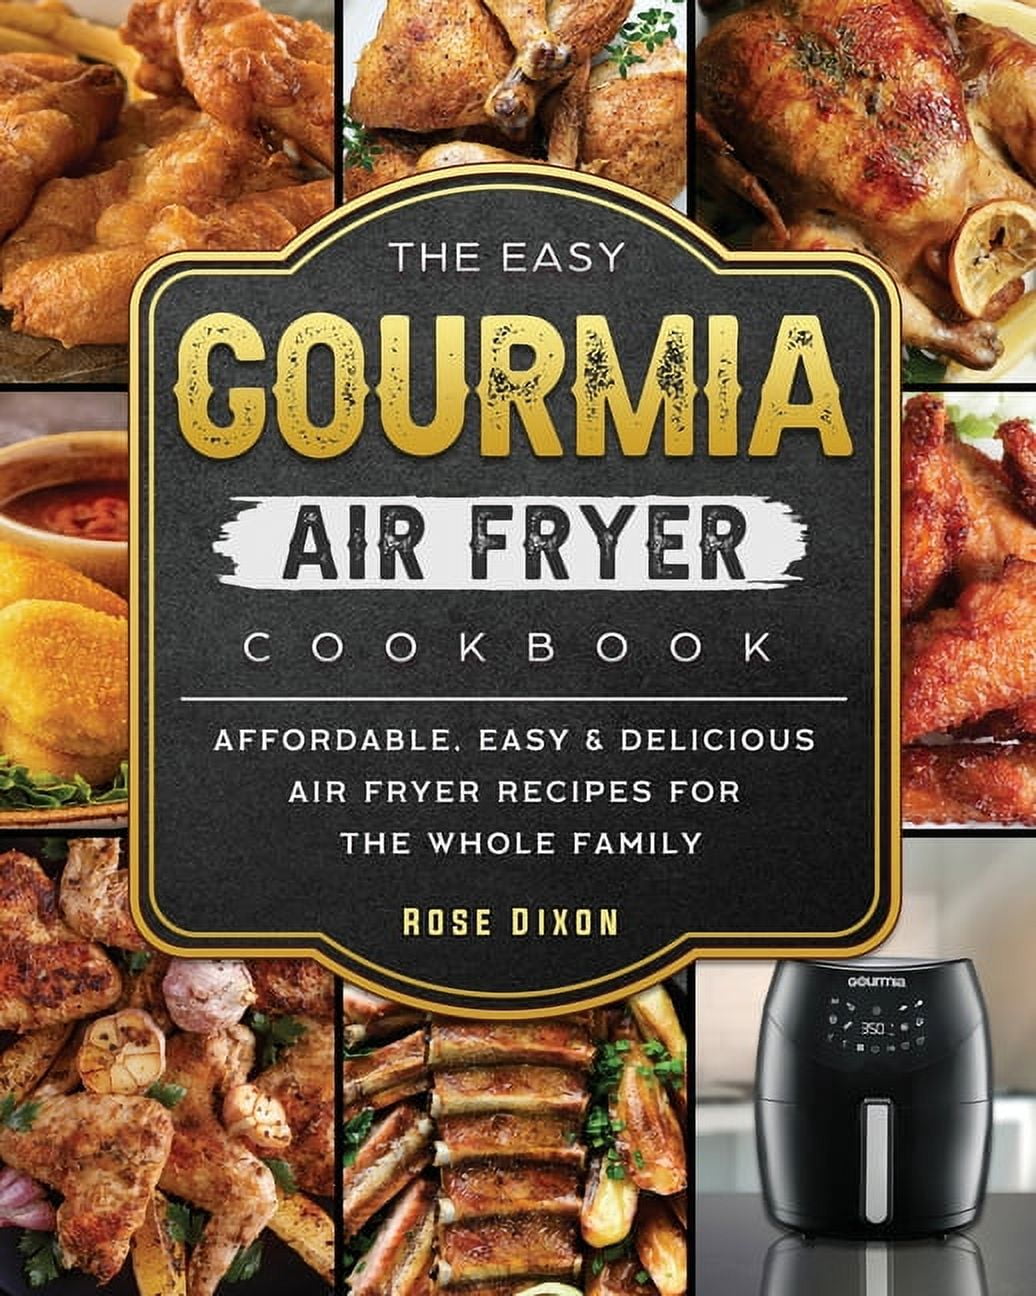 Save 50% on this Gourmia air fryer and give fried food a healthier twist